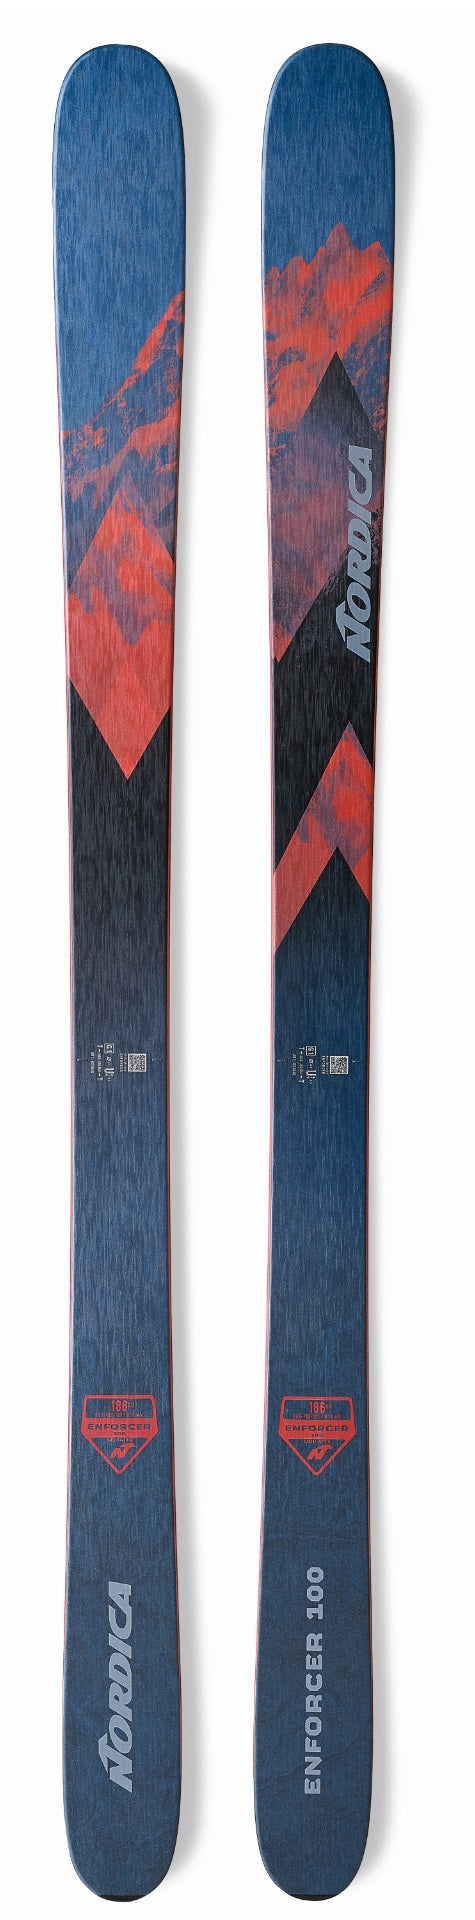 Nordica Enforcer 100 Snow Skis with Attack 14 Bindings